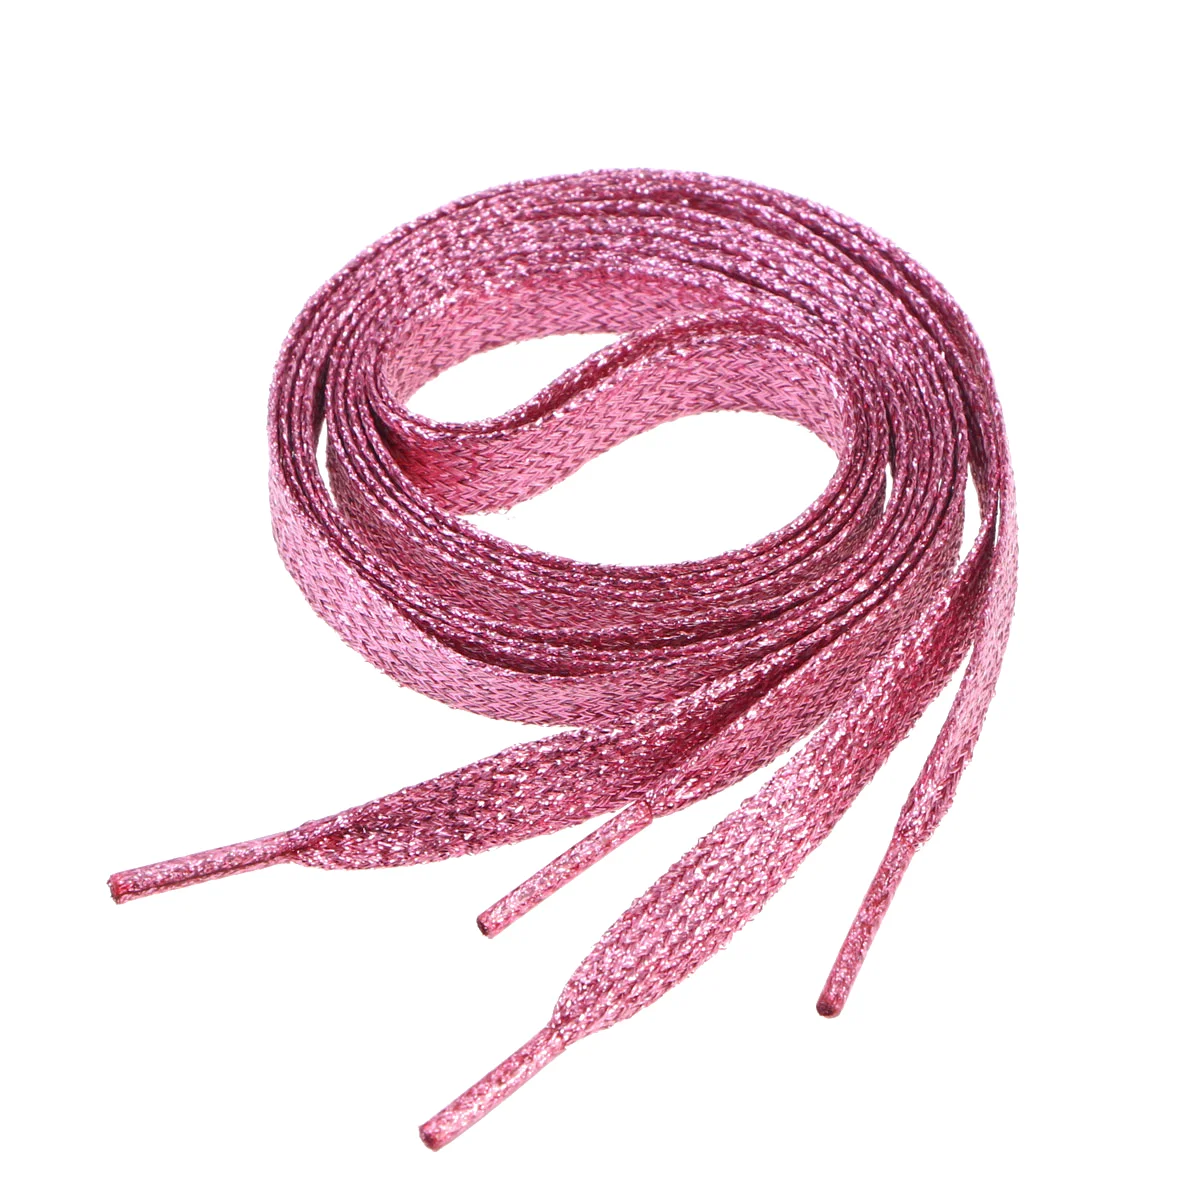 

1 1m Flat Shoe Colorful Shoes Boot String Replacement Decorative Pearlescent Shoelace Sports Supplies for Men